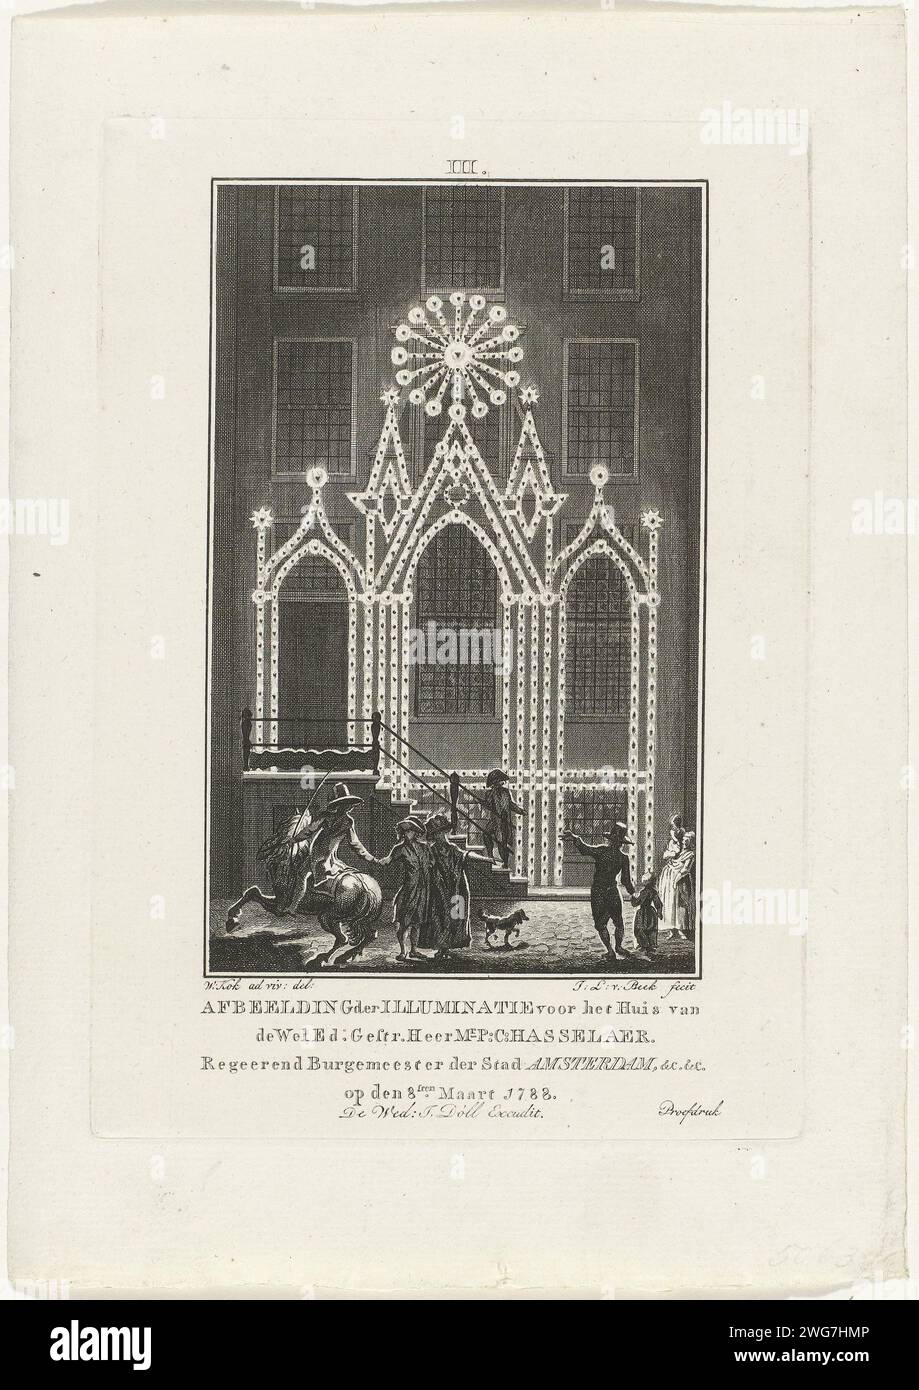 Illumination of the house of mr. P.C. Hasselaer in Amsterdam, 1788, Jan Lucas van der Beek, After Willem Kok, 1788 print Illumination applied to the facade of the house of Pieter Cornelis Hasselaer, mayor in Amsterdam. Numbered at the top: III. Part of a series of twelve records of the Illuminations and Decorations in Amsterdam on the 40th birthday of Prince Willem V on March 8, 1788. Amsterdam paper etching / engraving bonfire, fire-works (+ illumination, fire-works  festive activities) Amsterdam Stock Photo